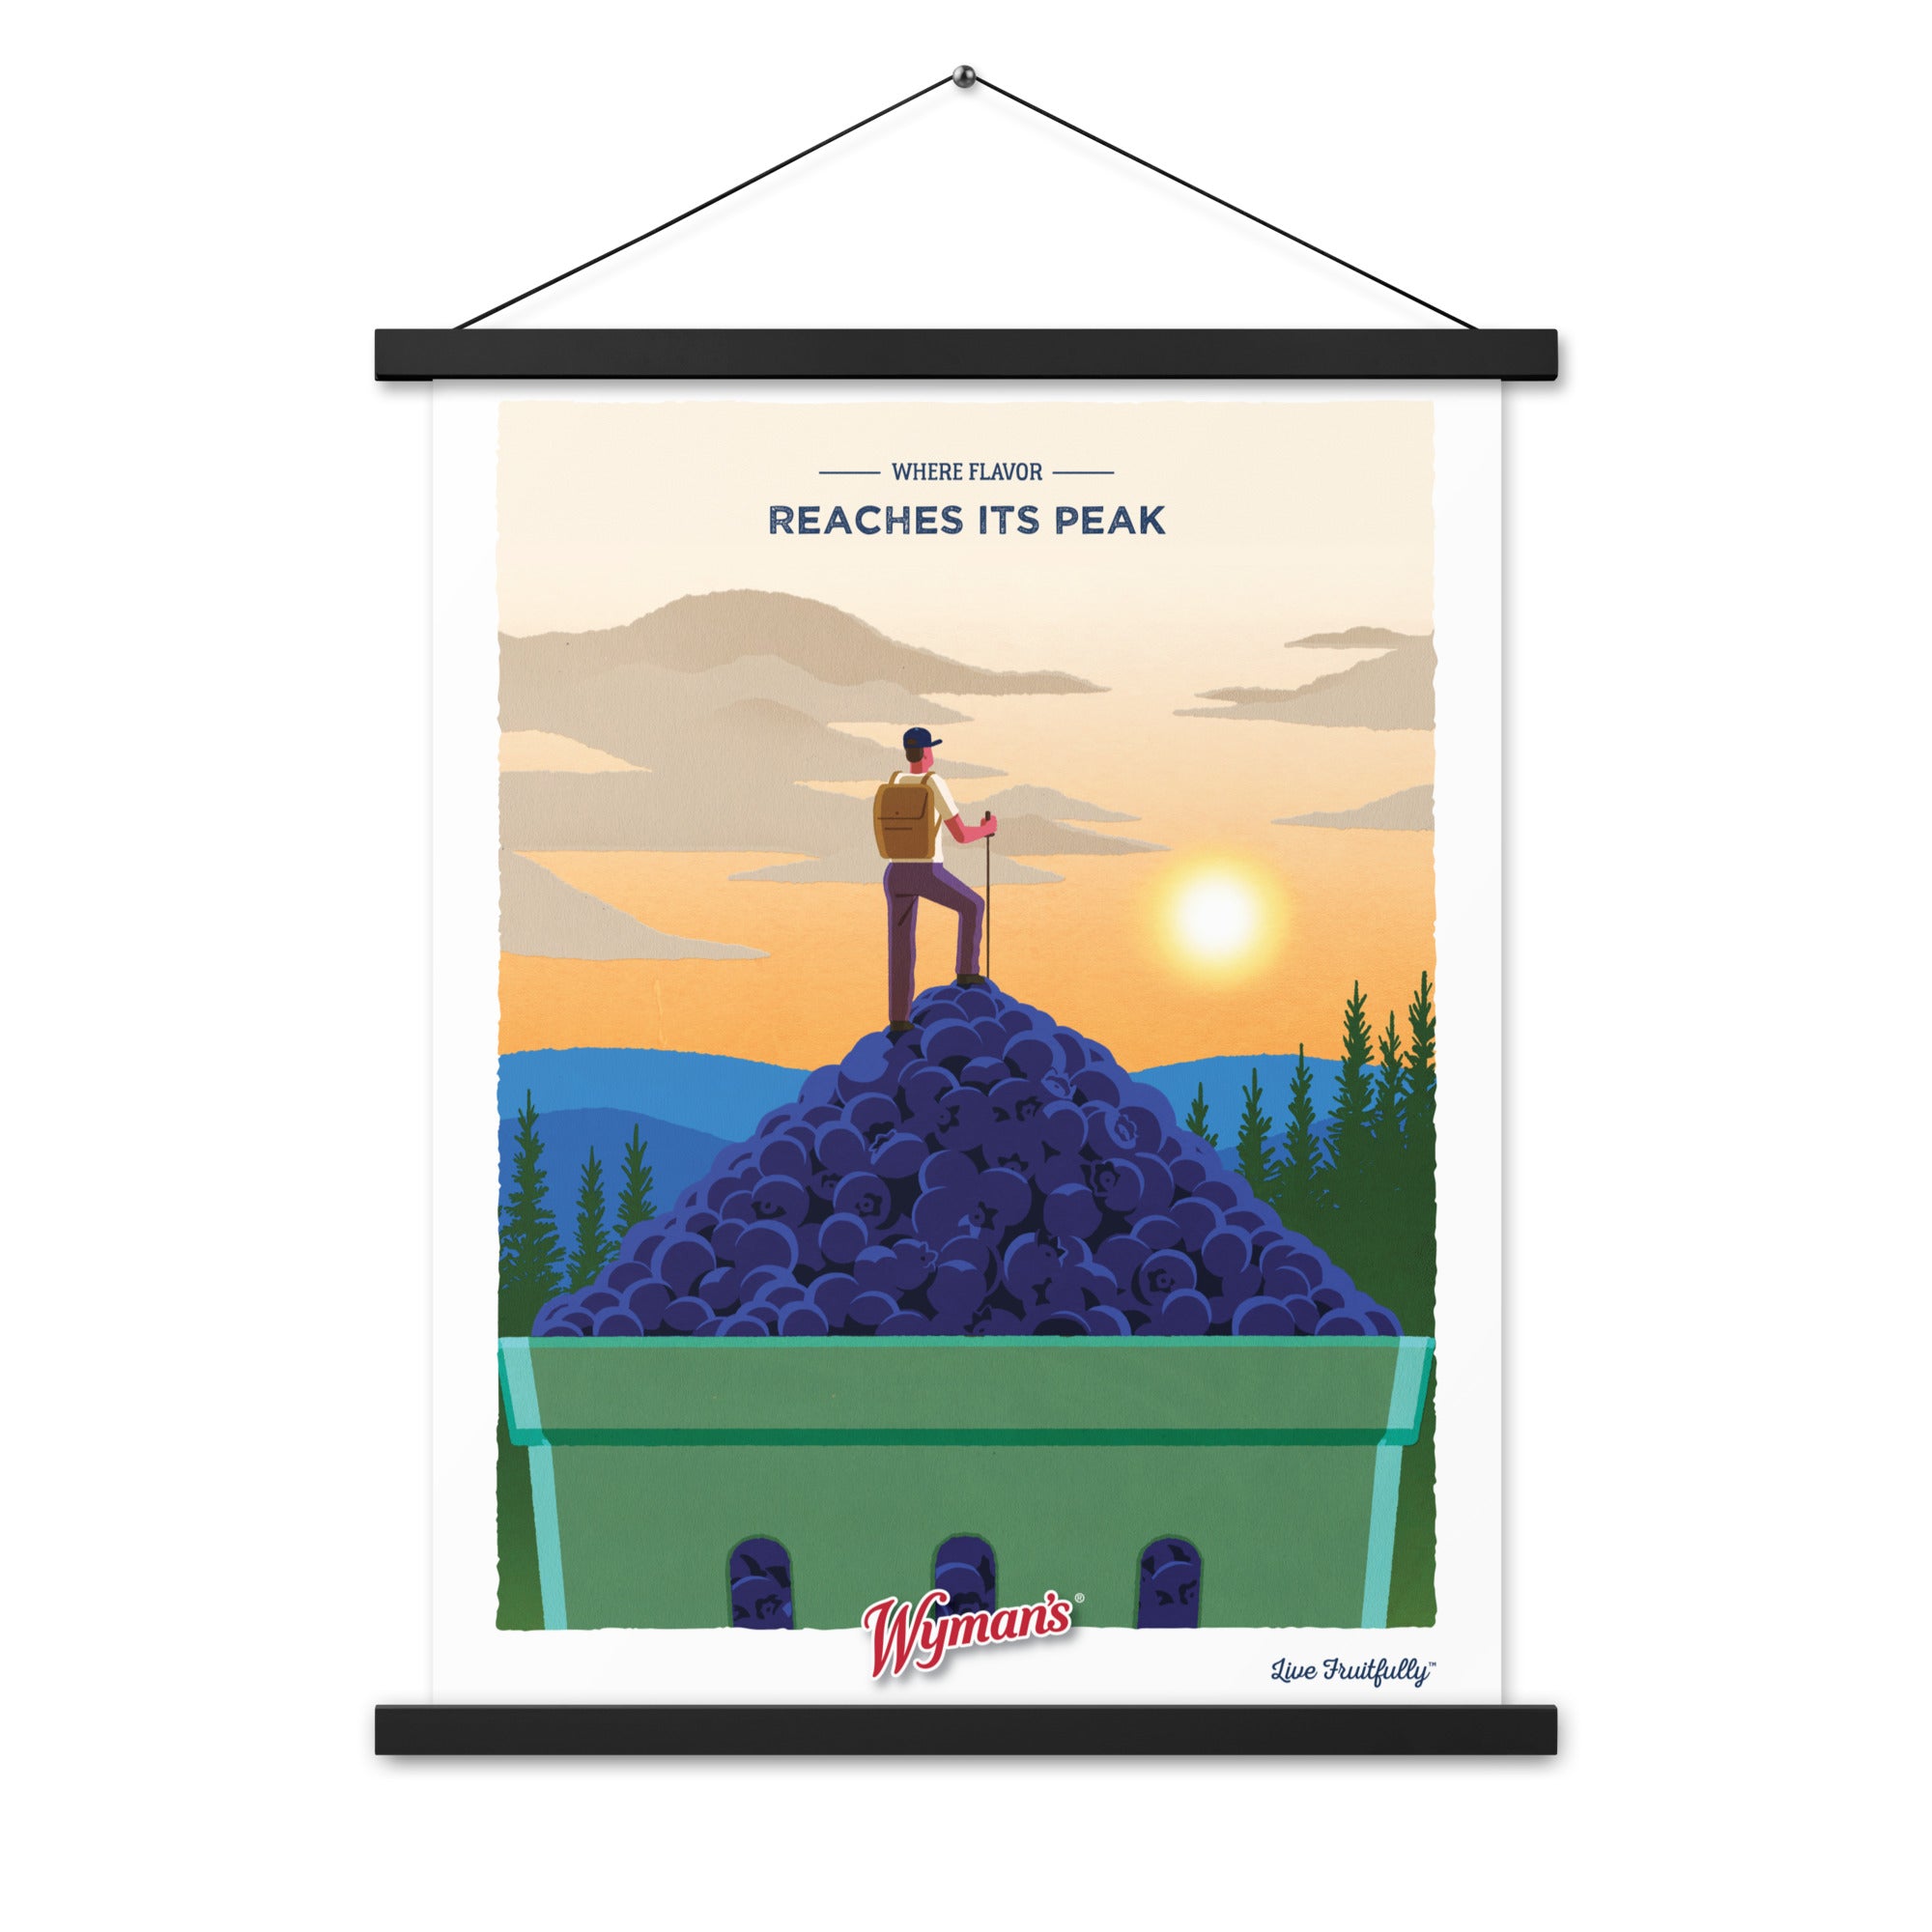 A print of the Where Flavor Reaches its Peak Poster by Shop Wyman's with a man standing on top of a pile of grapes.